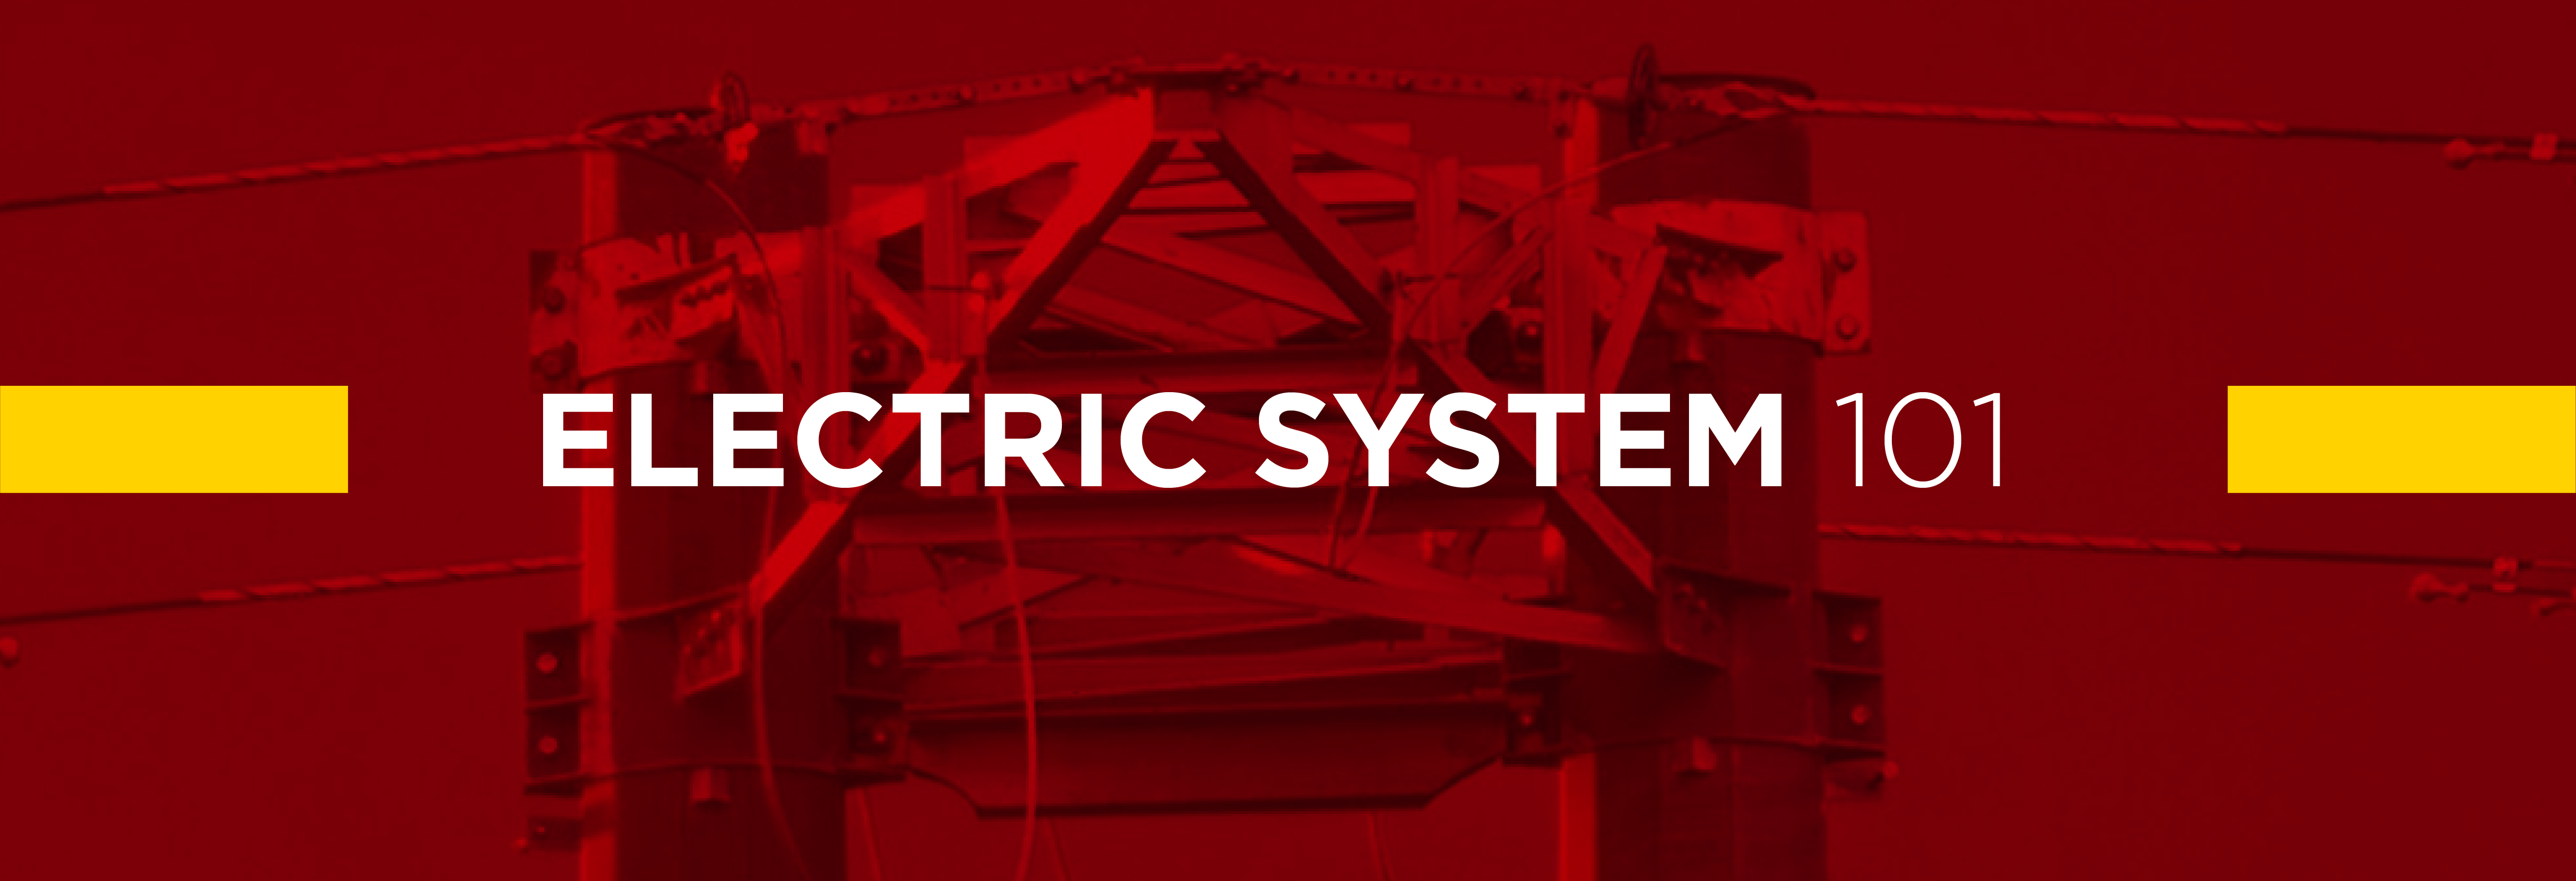 SECO News September 2019 Electric System 101